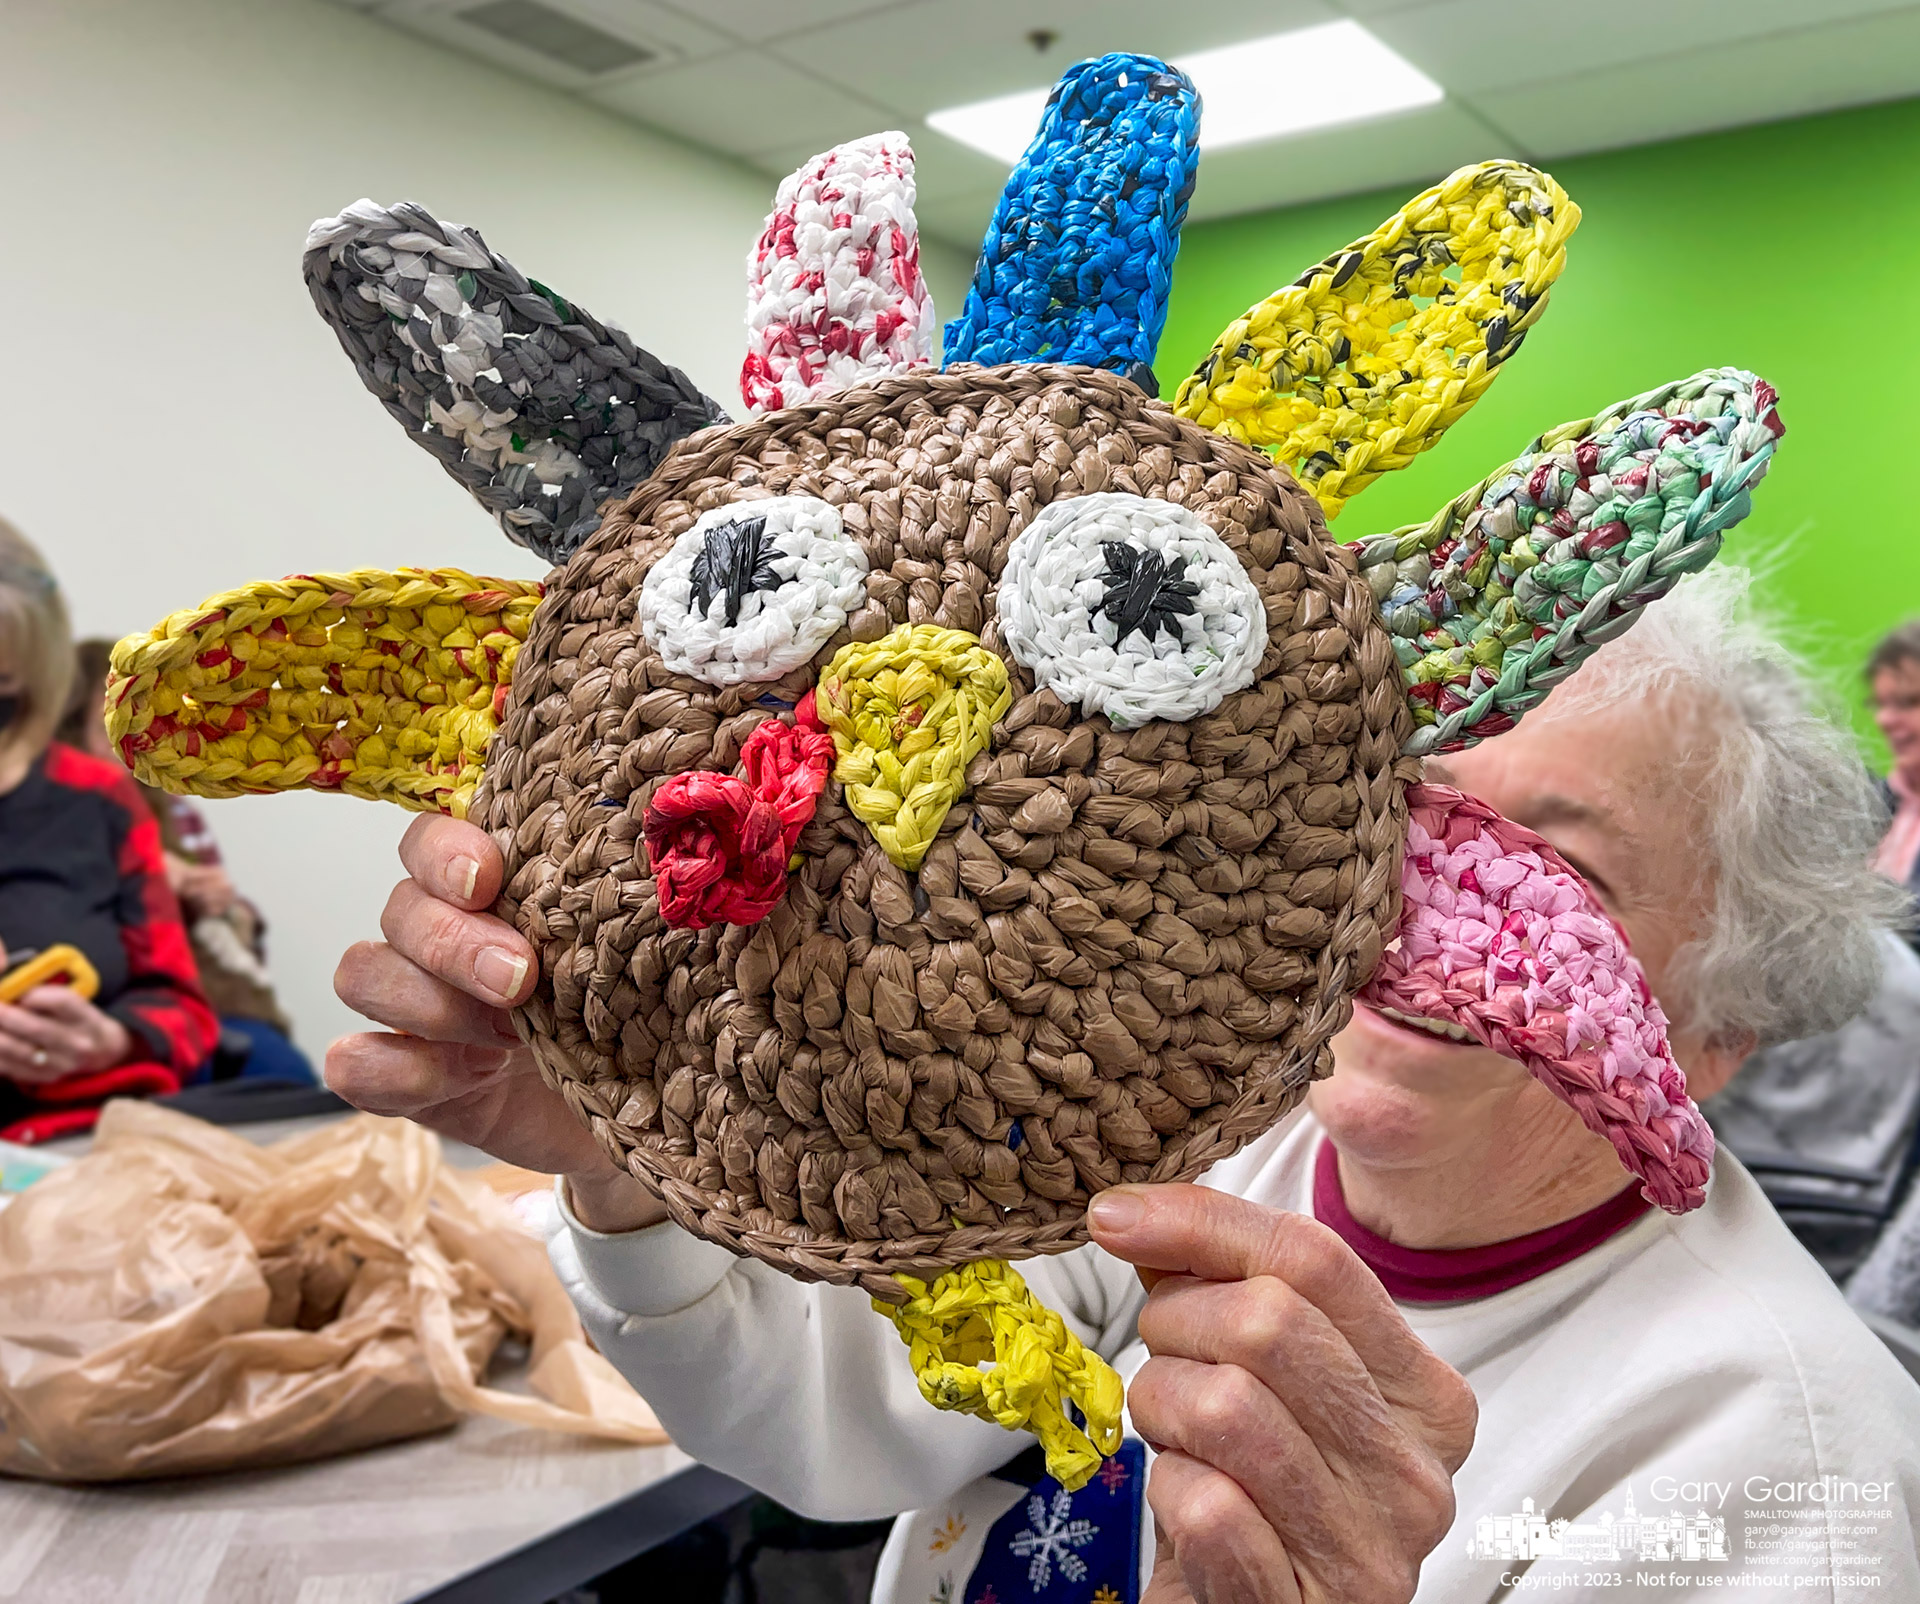 A knitter at a Westerville Libary club meeting shows off the turkey she made using plastic shopping bags in a technique named plarning, a combination of plastic and yarn using plastic strips instead of traditional yarn to make a bag, or in this case a Plarn turkey, that can be easily washed without damage, shrinkage, or losing its shape. My Final Photo for January 5, 2023.